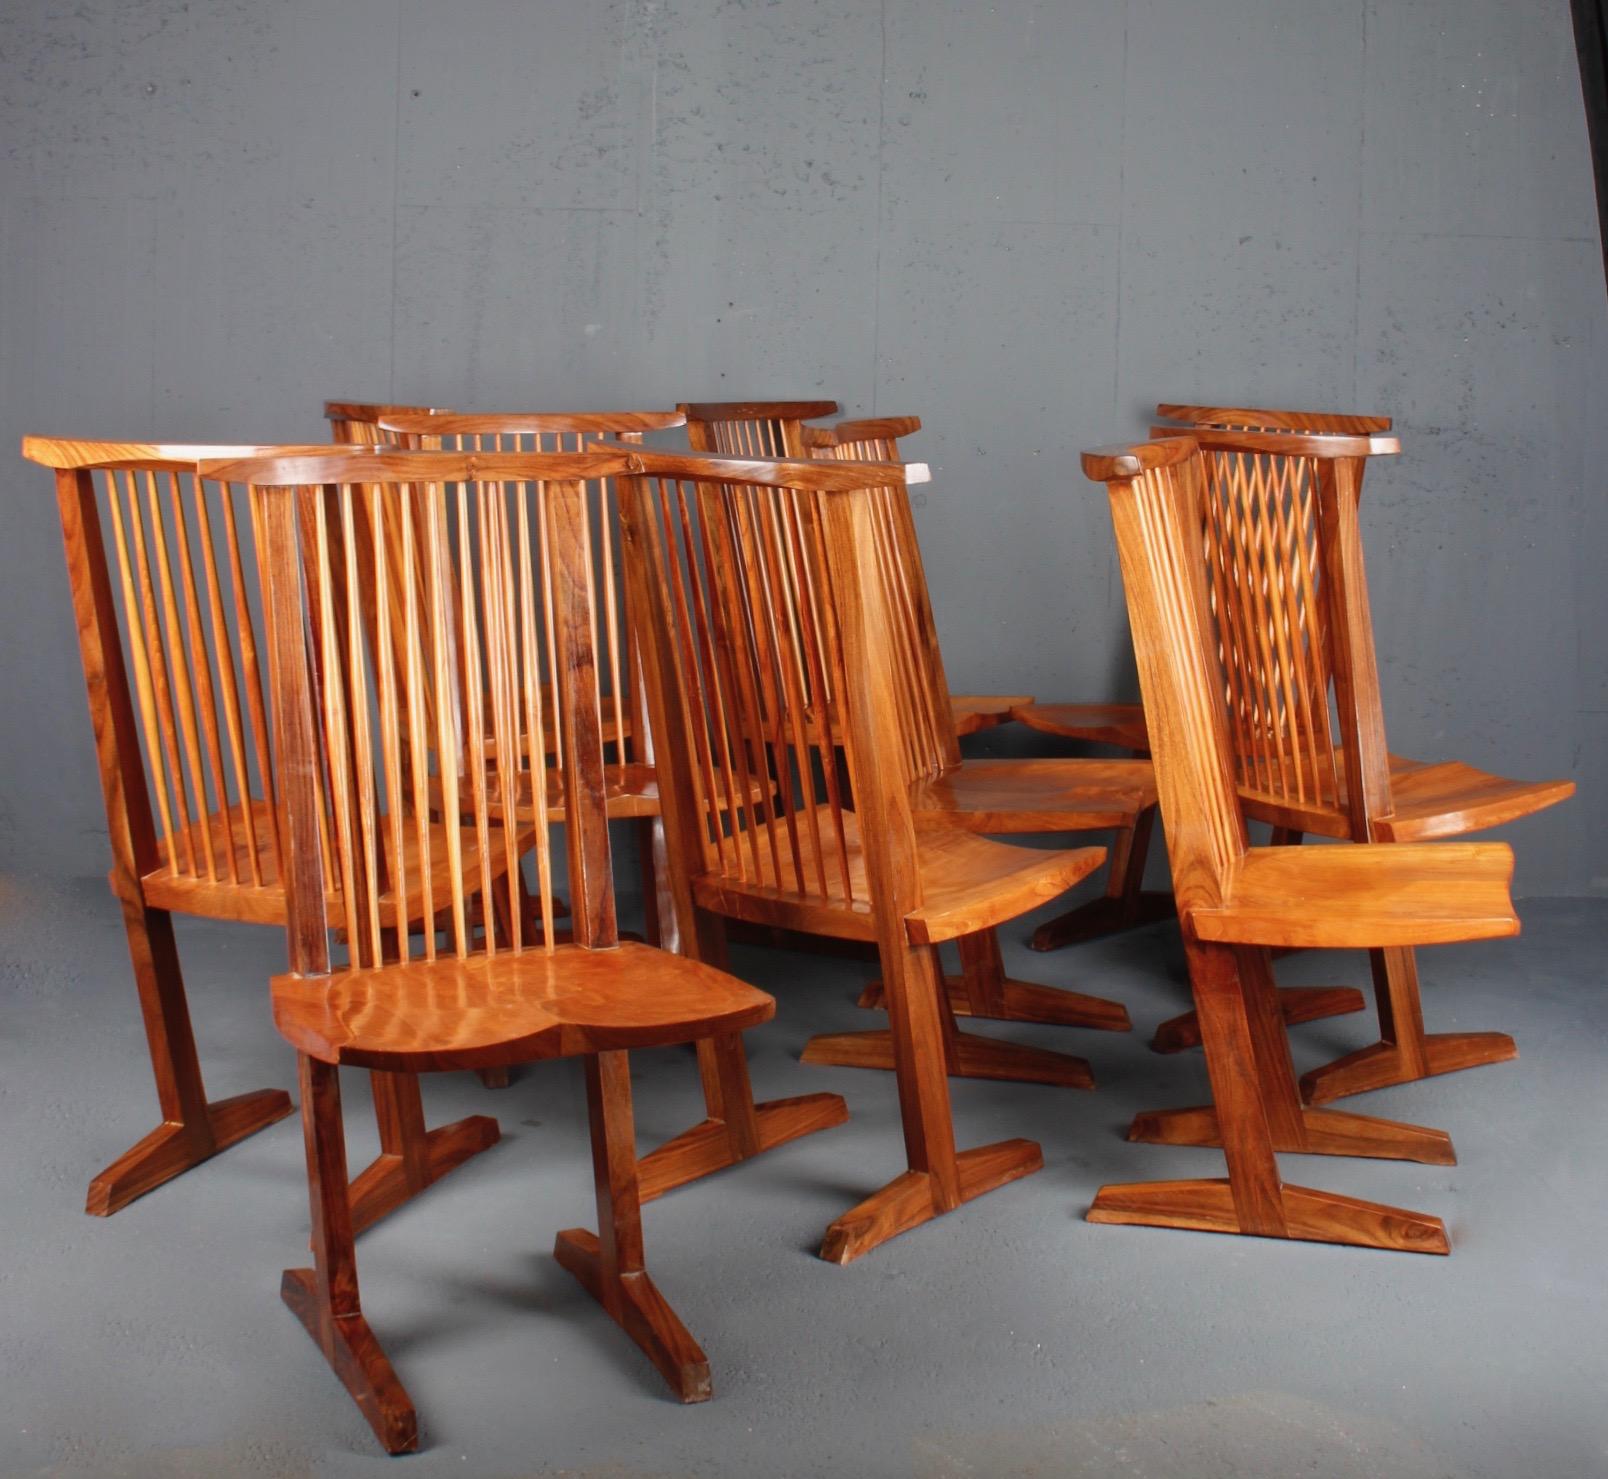 Vintage Set of 12 Conoid Chairs, after George Nakashima 1